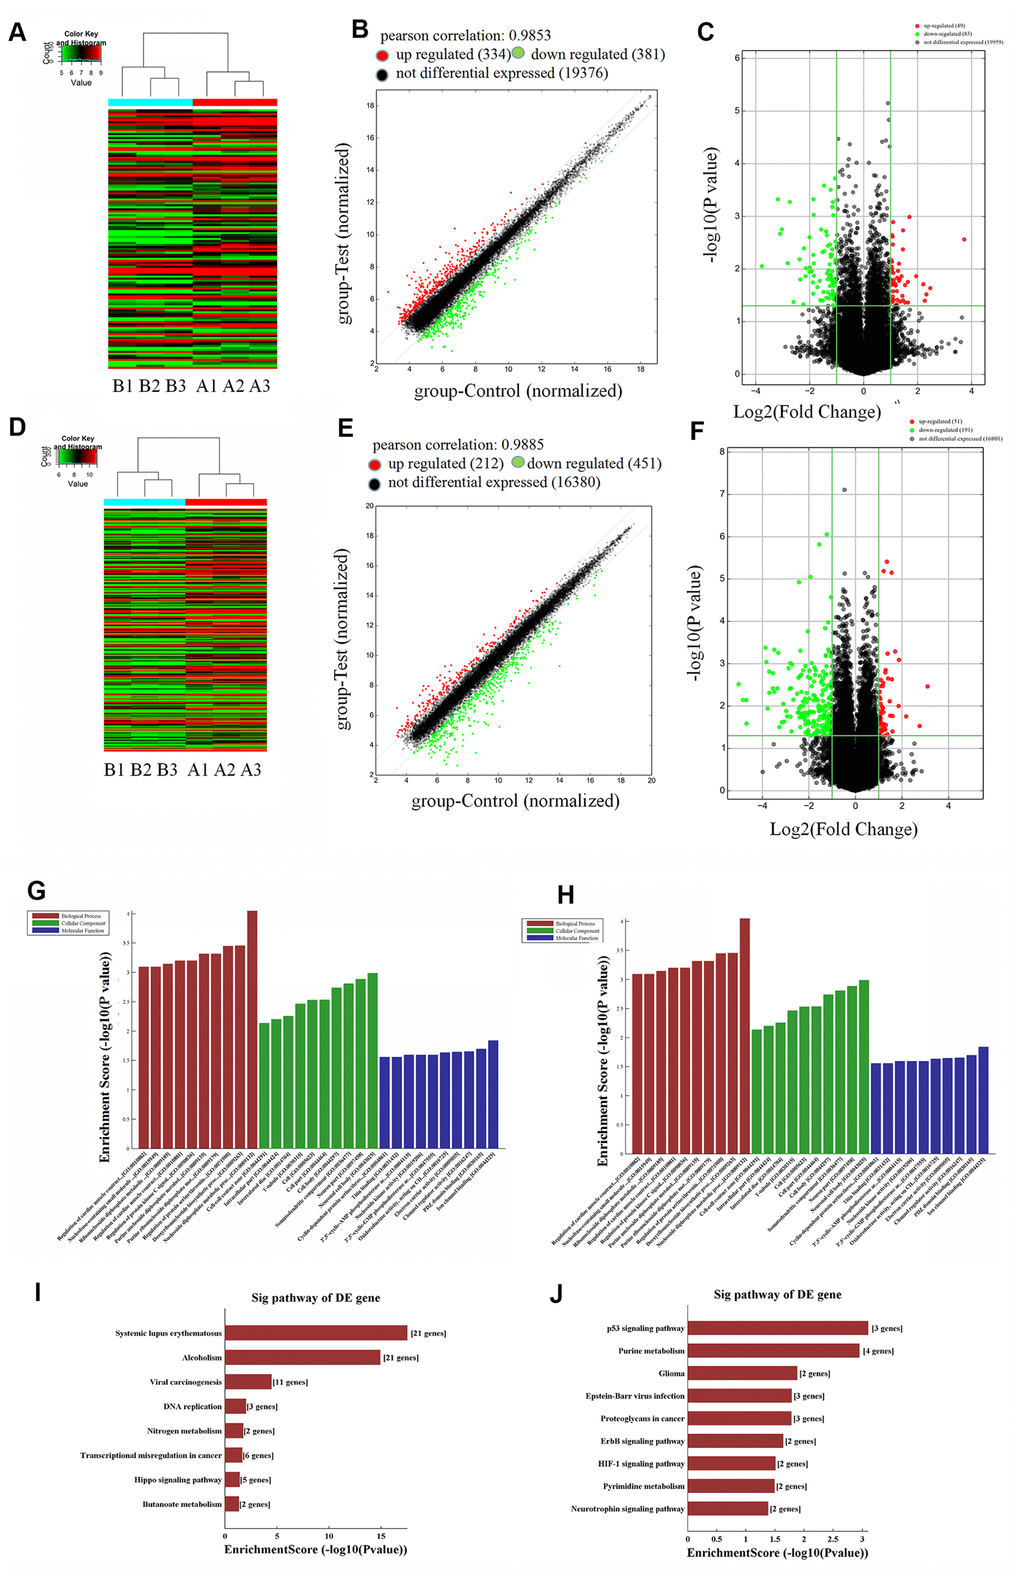 Microarray analysis of lncRNAs (long non-coding RNA) and mRNAs in P1 and P5 chondrocytes (P1: A1, A2, A3; P5: B1, B2, B3). (A) Thermal map of lncRNAs, y-axis: relative intensity of lncRNAs; (B) scatter plot of lncRNAs, Pearson correlation = 0.9853, upregulated (red) lncRNAs = 334, downregulated (green) lncRNAs = 381, not differentially expressed (black) lncRNAs = 19,376; (C) volcano plot of upregulated lncRNAs (red) = 49, downregulated (green) lncRNAs = 83, not differentially expressed (black) =19,959. (D) Thermal map of mRNAs, y-axis: relative intensity of mRNAs. (E) Scatter plot of mRNAs, Pearson correlation = 0.9885, upregulated (red) mRNAs = 212, downregulated (green) mRNAs = 451, not differentially expressed (black) mRNAs = 16,380. (F) volcano plot of mRNAs, upregulated (red) mRNAs = 51, downregulated (green) mRNAs = 191, not differentially expressed (black) mRNAs = 16,801. (G) Top ten downregulated biological processes, cellular components, and molecular functions in P5 chondrocytes compared to P1 cells. (H) Top ten upregulated biological processes, cellular components, and molecular functions in P5 chondrocytes. (I) Top eight downregulated pathways in P5 chondrocytes. (J) Top nine upregulated pathways in P5 chondrocytes.